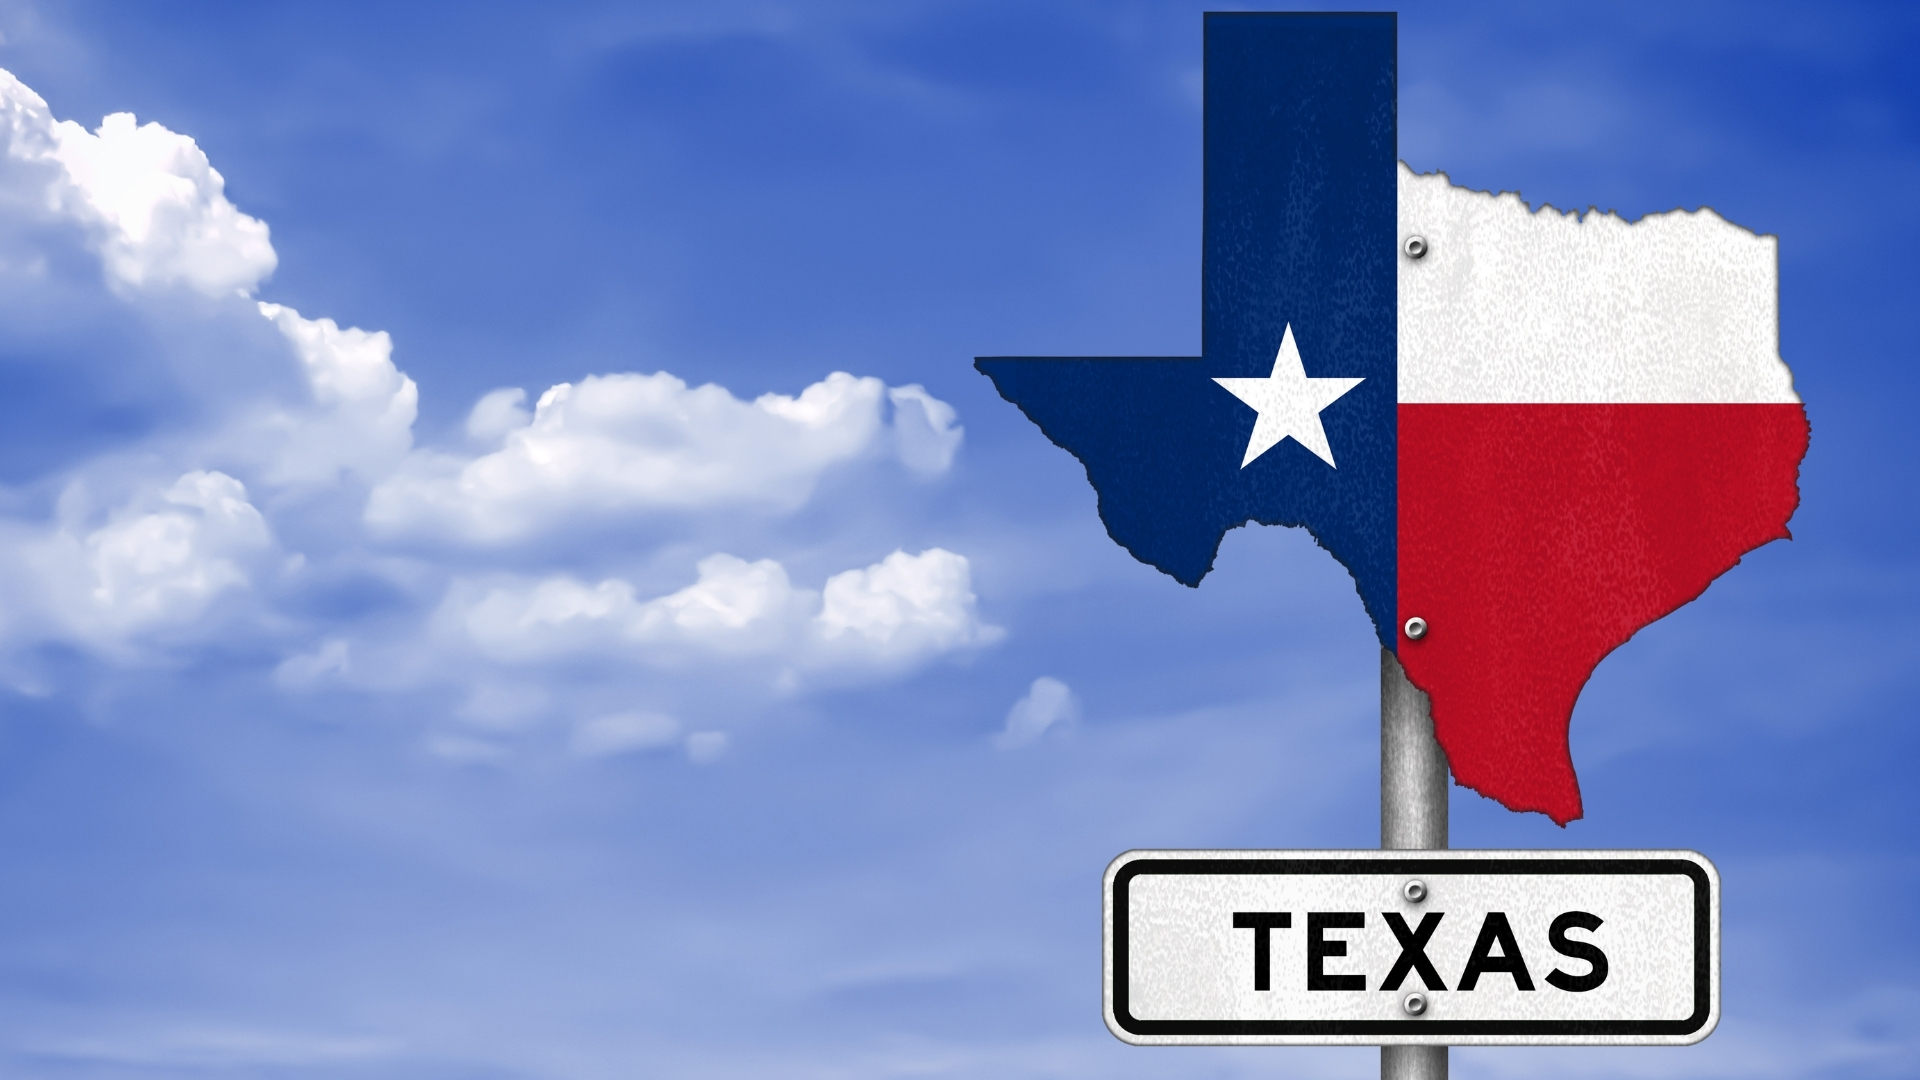 2234 Cute Texas Graphic Images Stock Photos  Vectors  Shutterstock